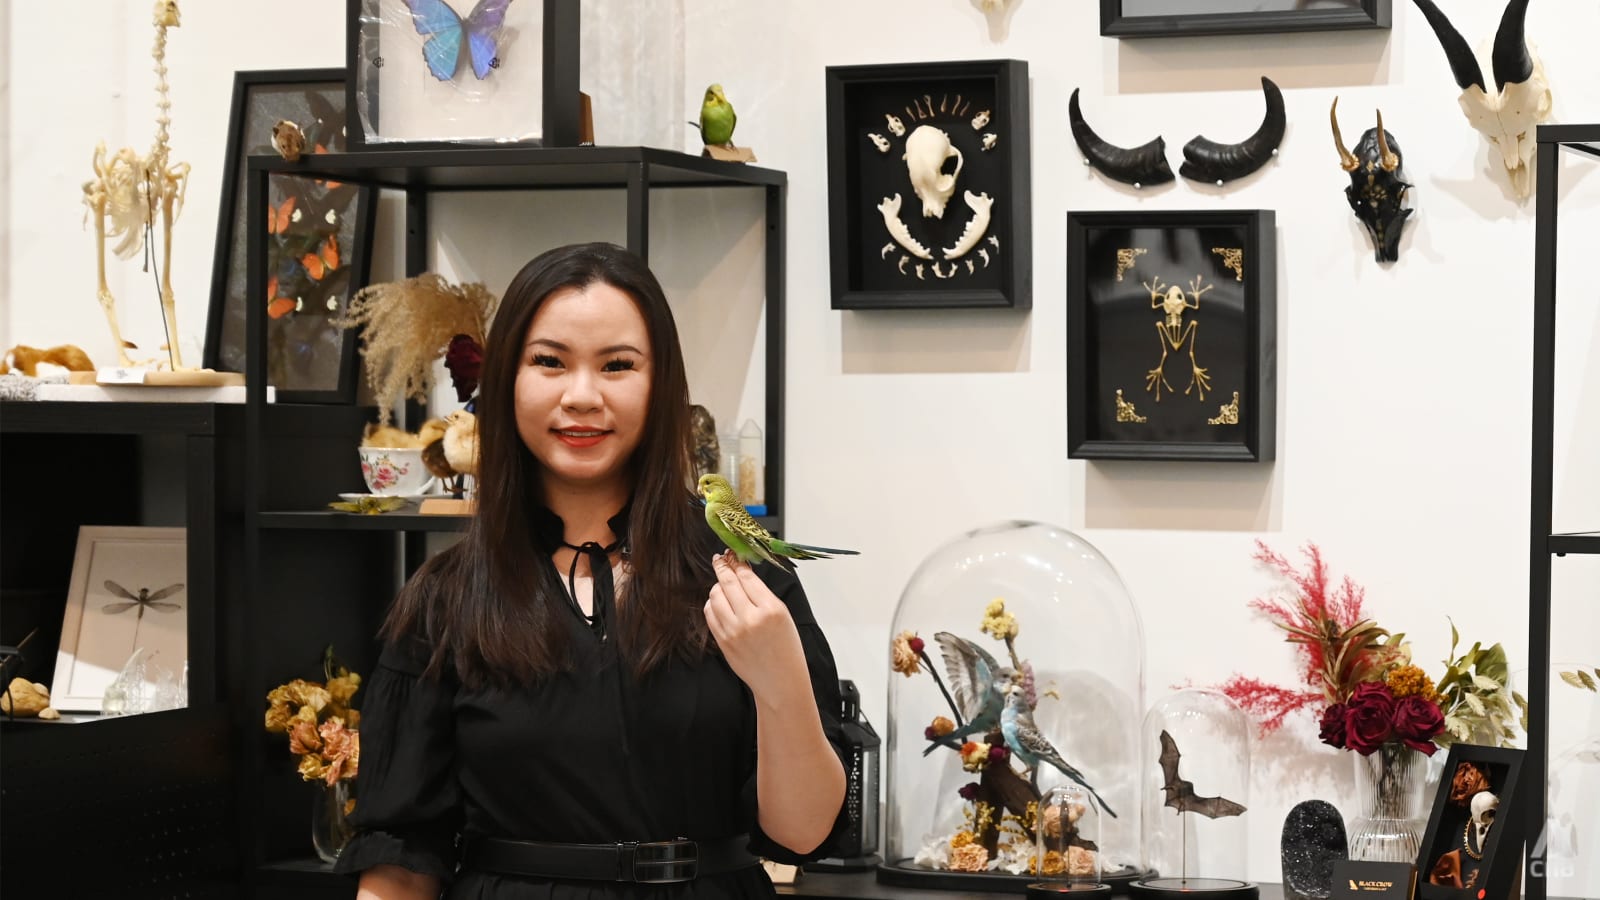 Meet the taxidermist in Singapore who finds beauty and meaning in dead animals